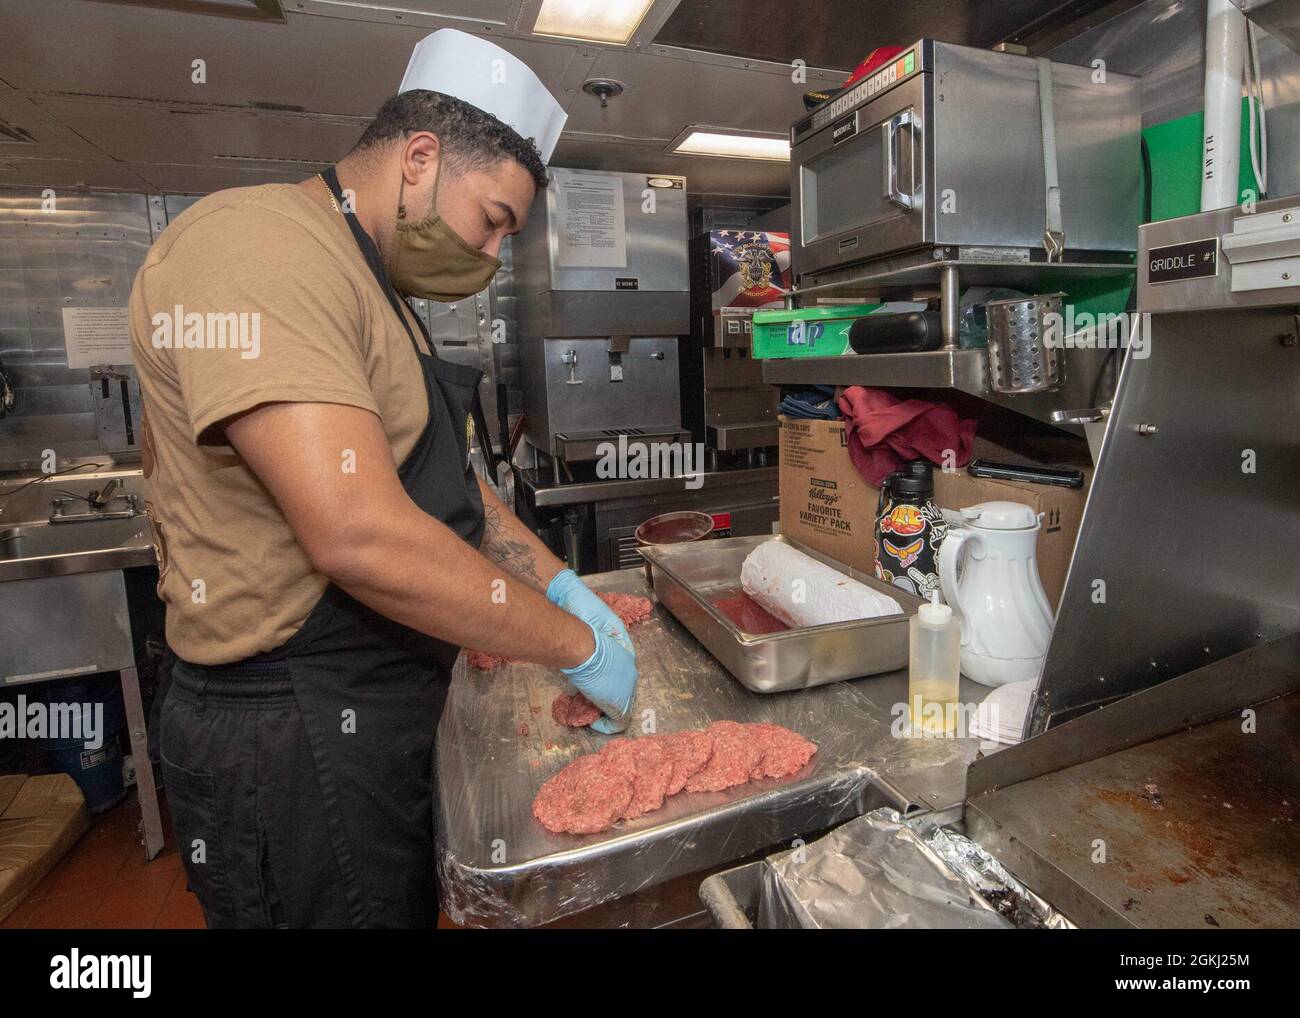 PACIFIC OCEAN (April 28, 2021) U.S. Navy Culinary Specialist Seaman Steven Rodriguez, from Bronx, N.Y., shapes hamburger patties in the galley of the Ticonderoga-class guided-missile cruiser USS Bunker Hill (CG 52) April 28, 2021. Bunker Hill, part of the Theodore Roosevelt Carrier Strike Group, is on a scheduled deployment conducting routine operations in U.S. 3rd Fleet. Stock Photo